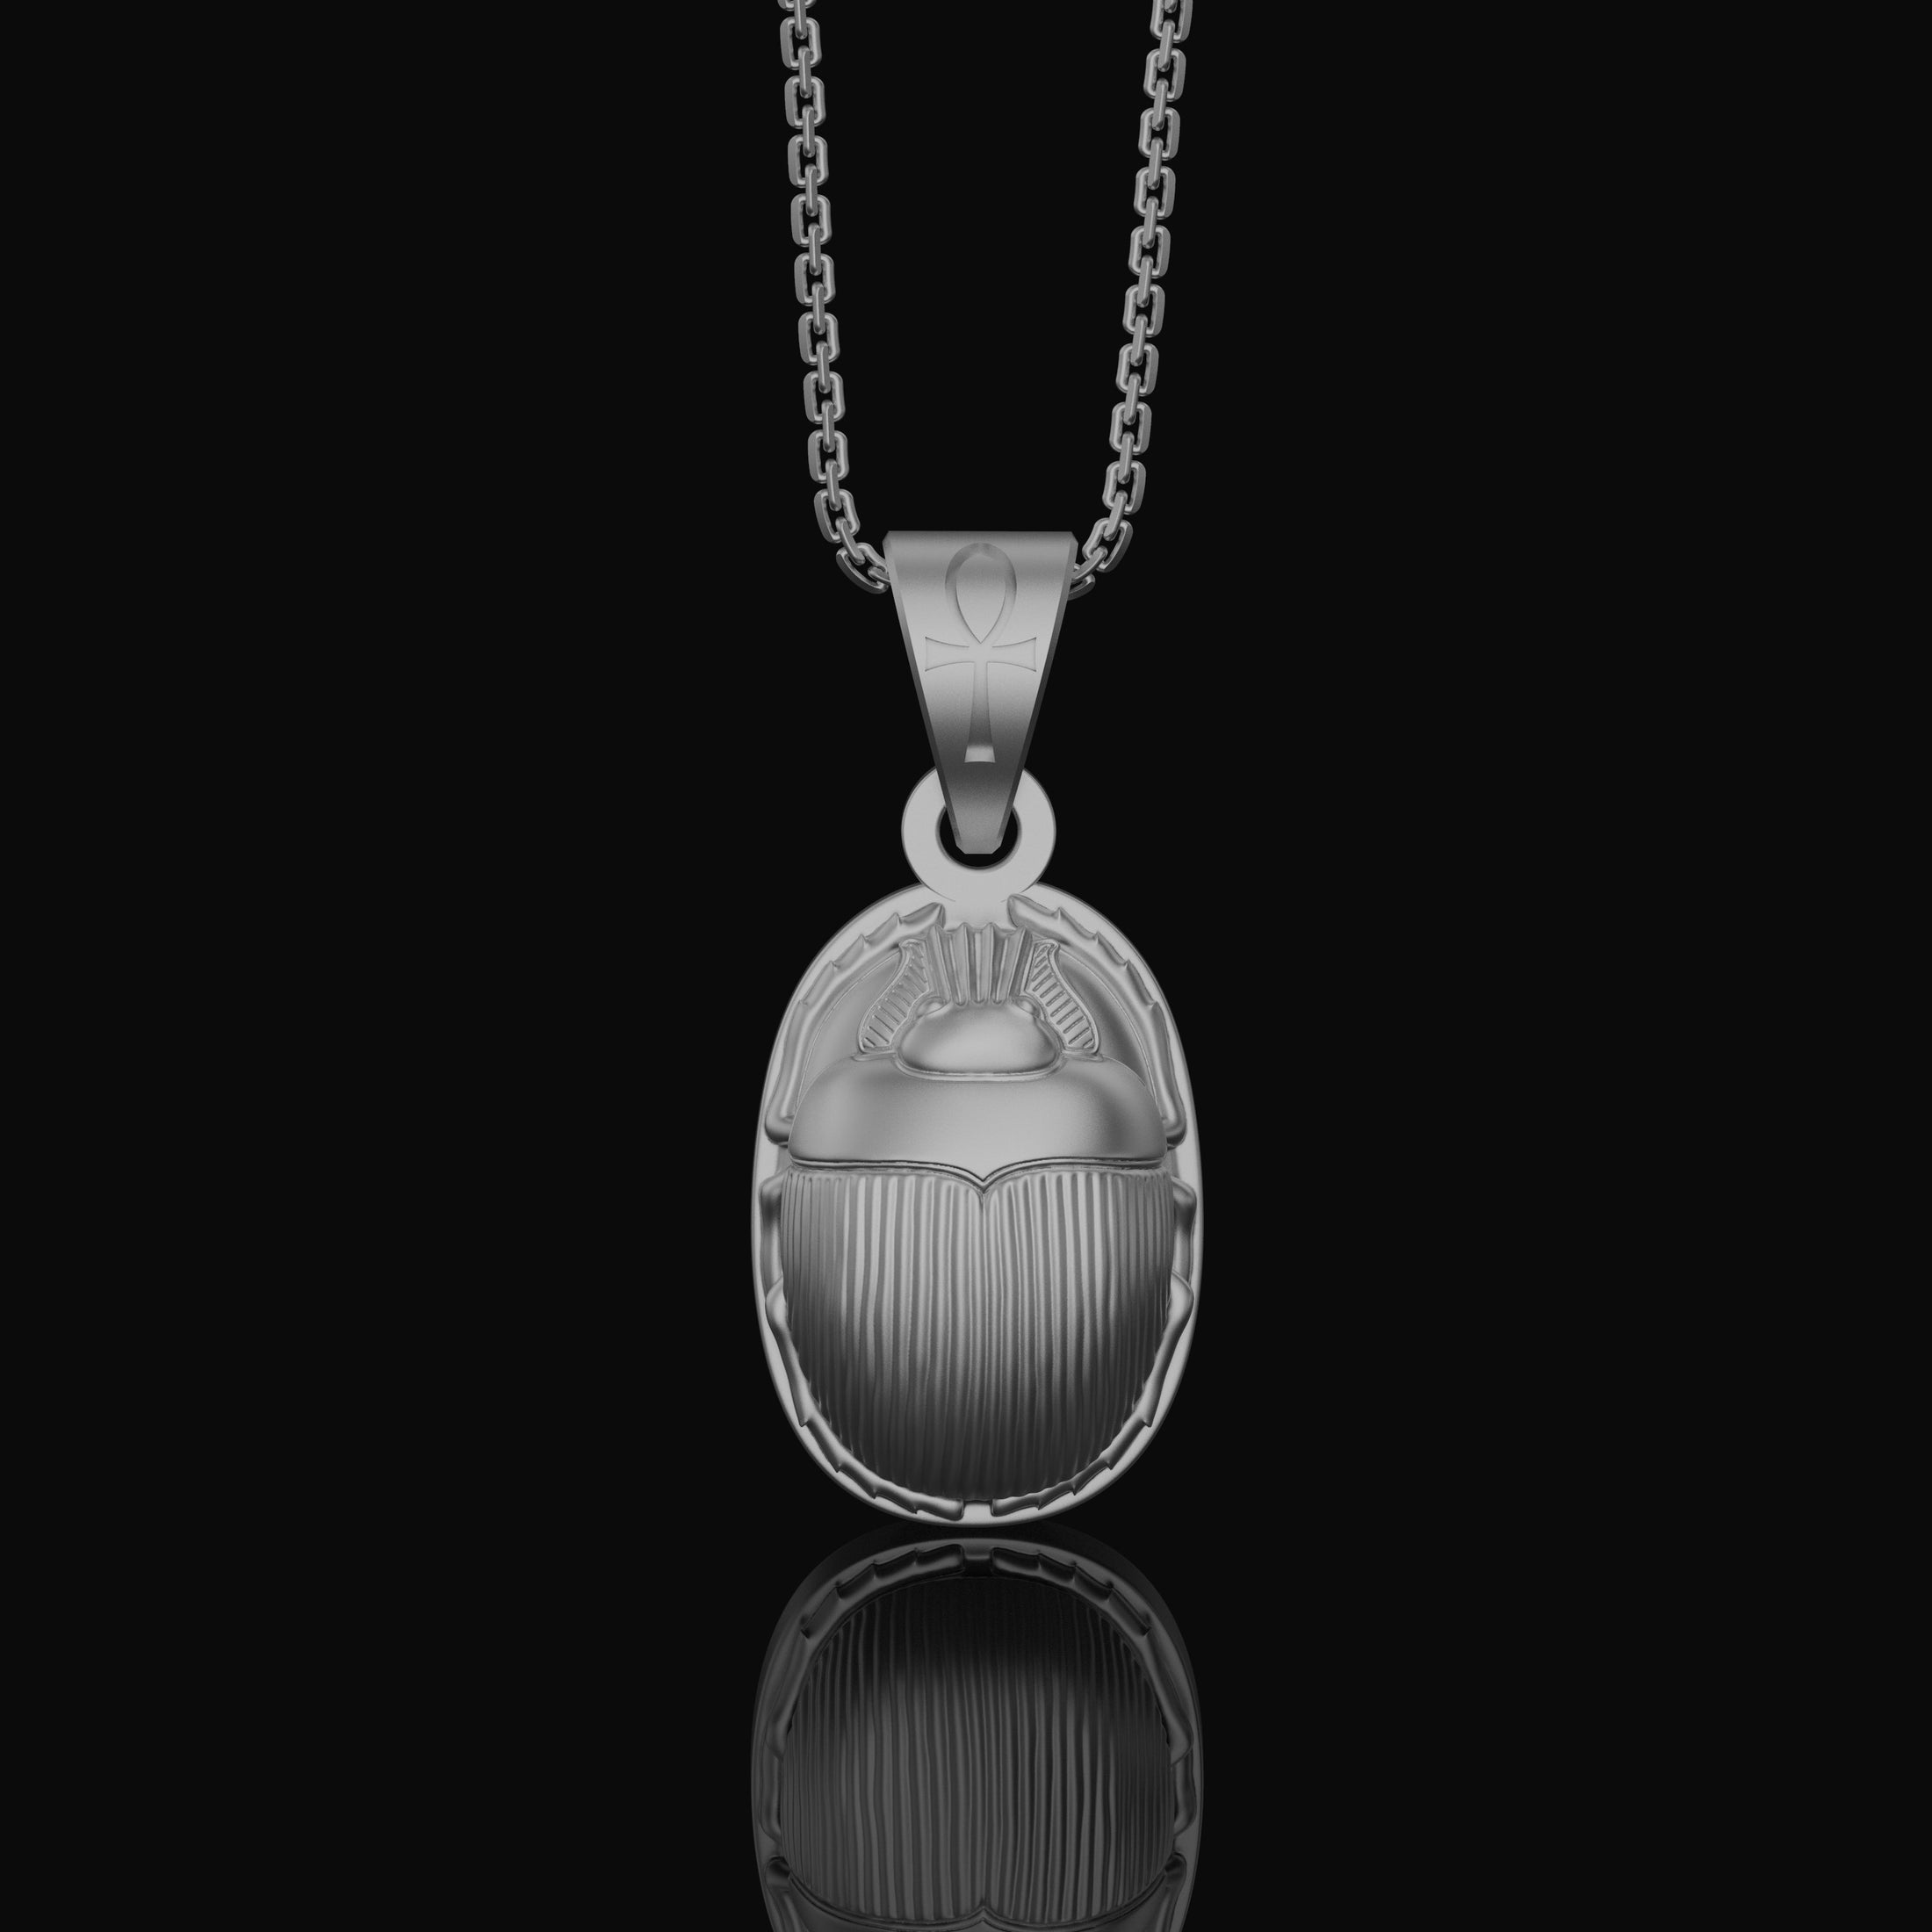 Silver Scarab Pendant - Egyptian Scarab Medal Necklace, Ancient Symbol Jewelry, Mystical Beetle Gift